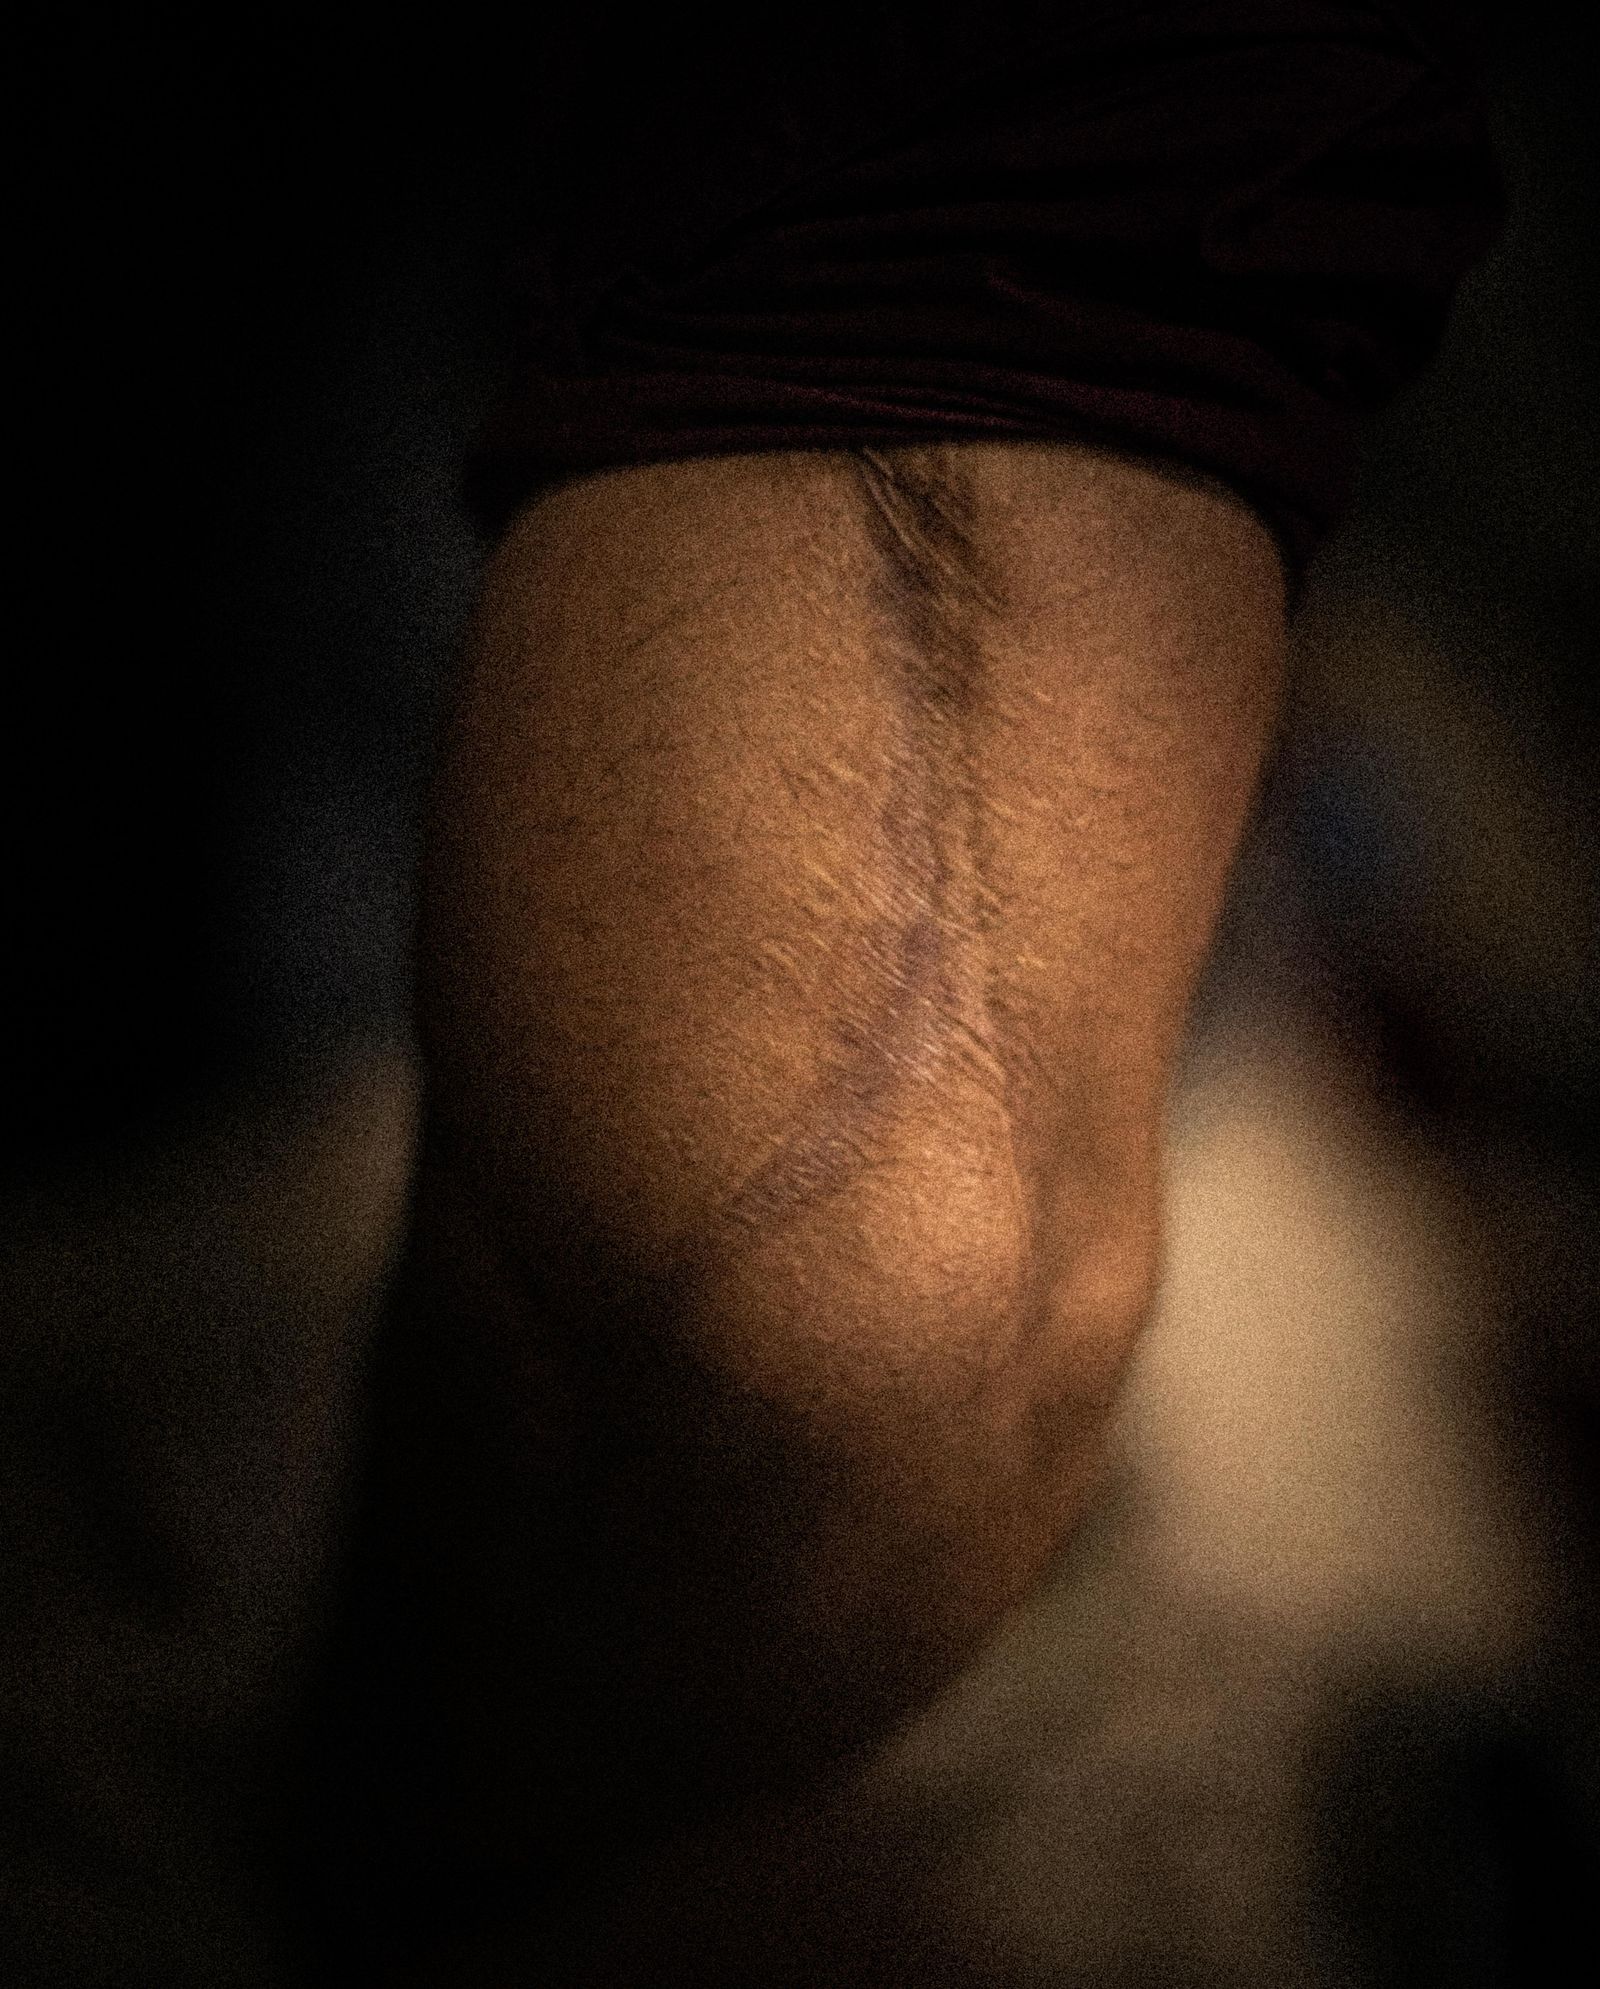 © Chloe Sharrock - Wound of a militiaman from the 2016 conflict against the Islamic State. Bassorah, Iraq.